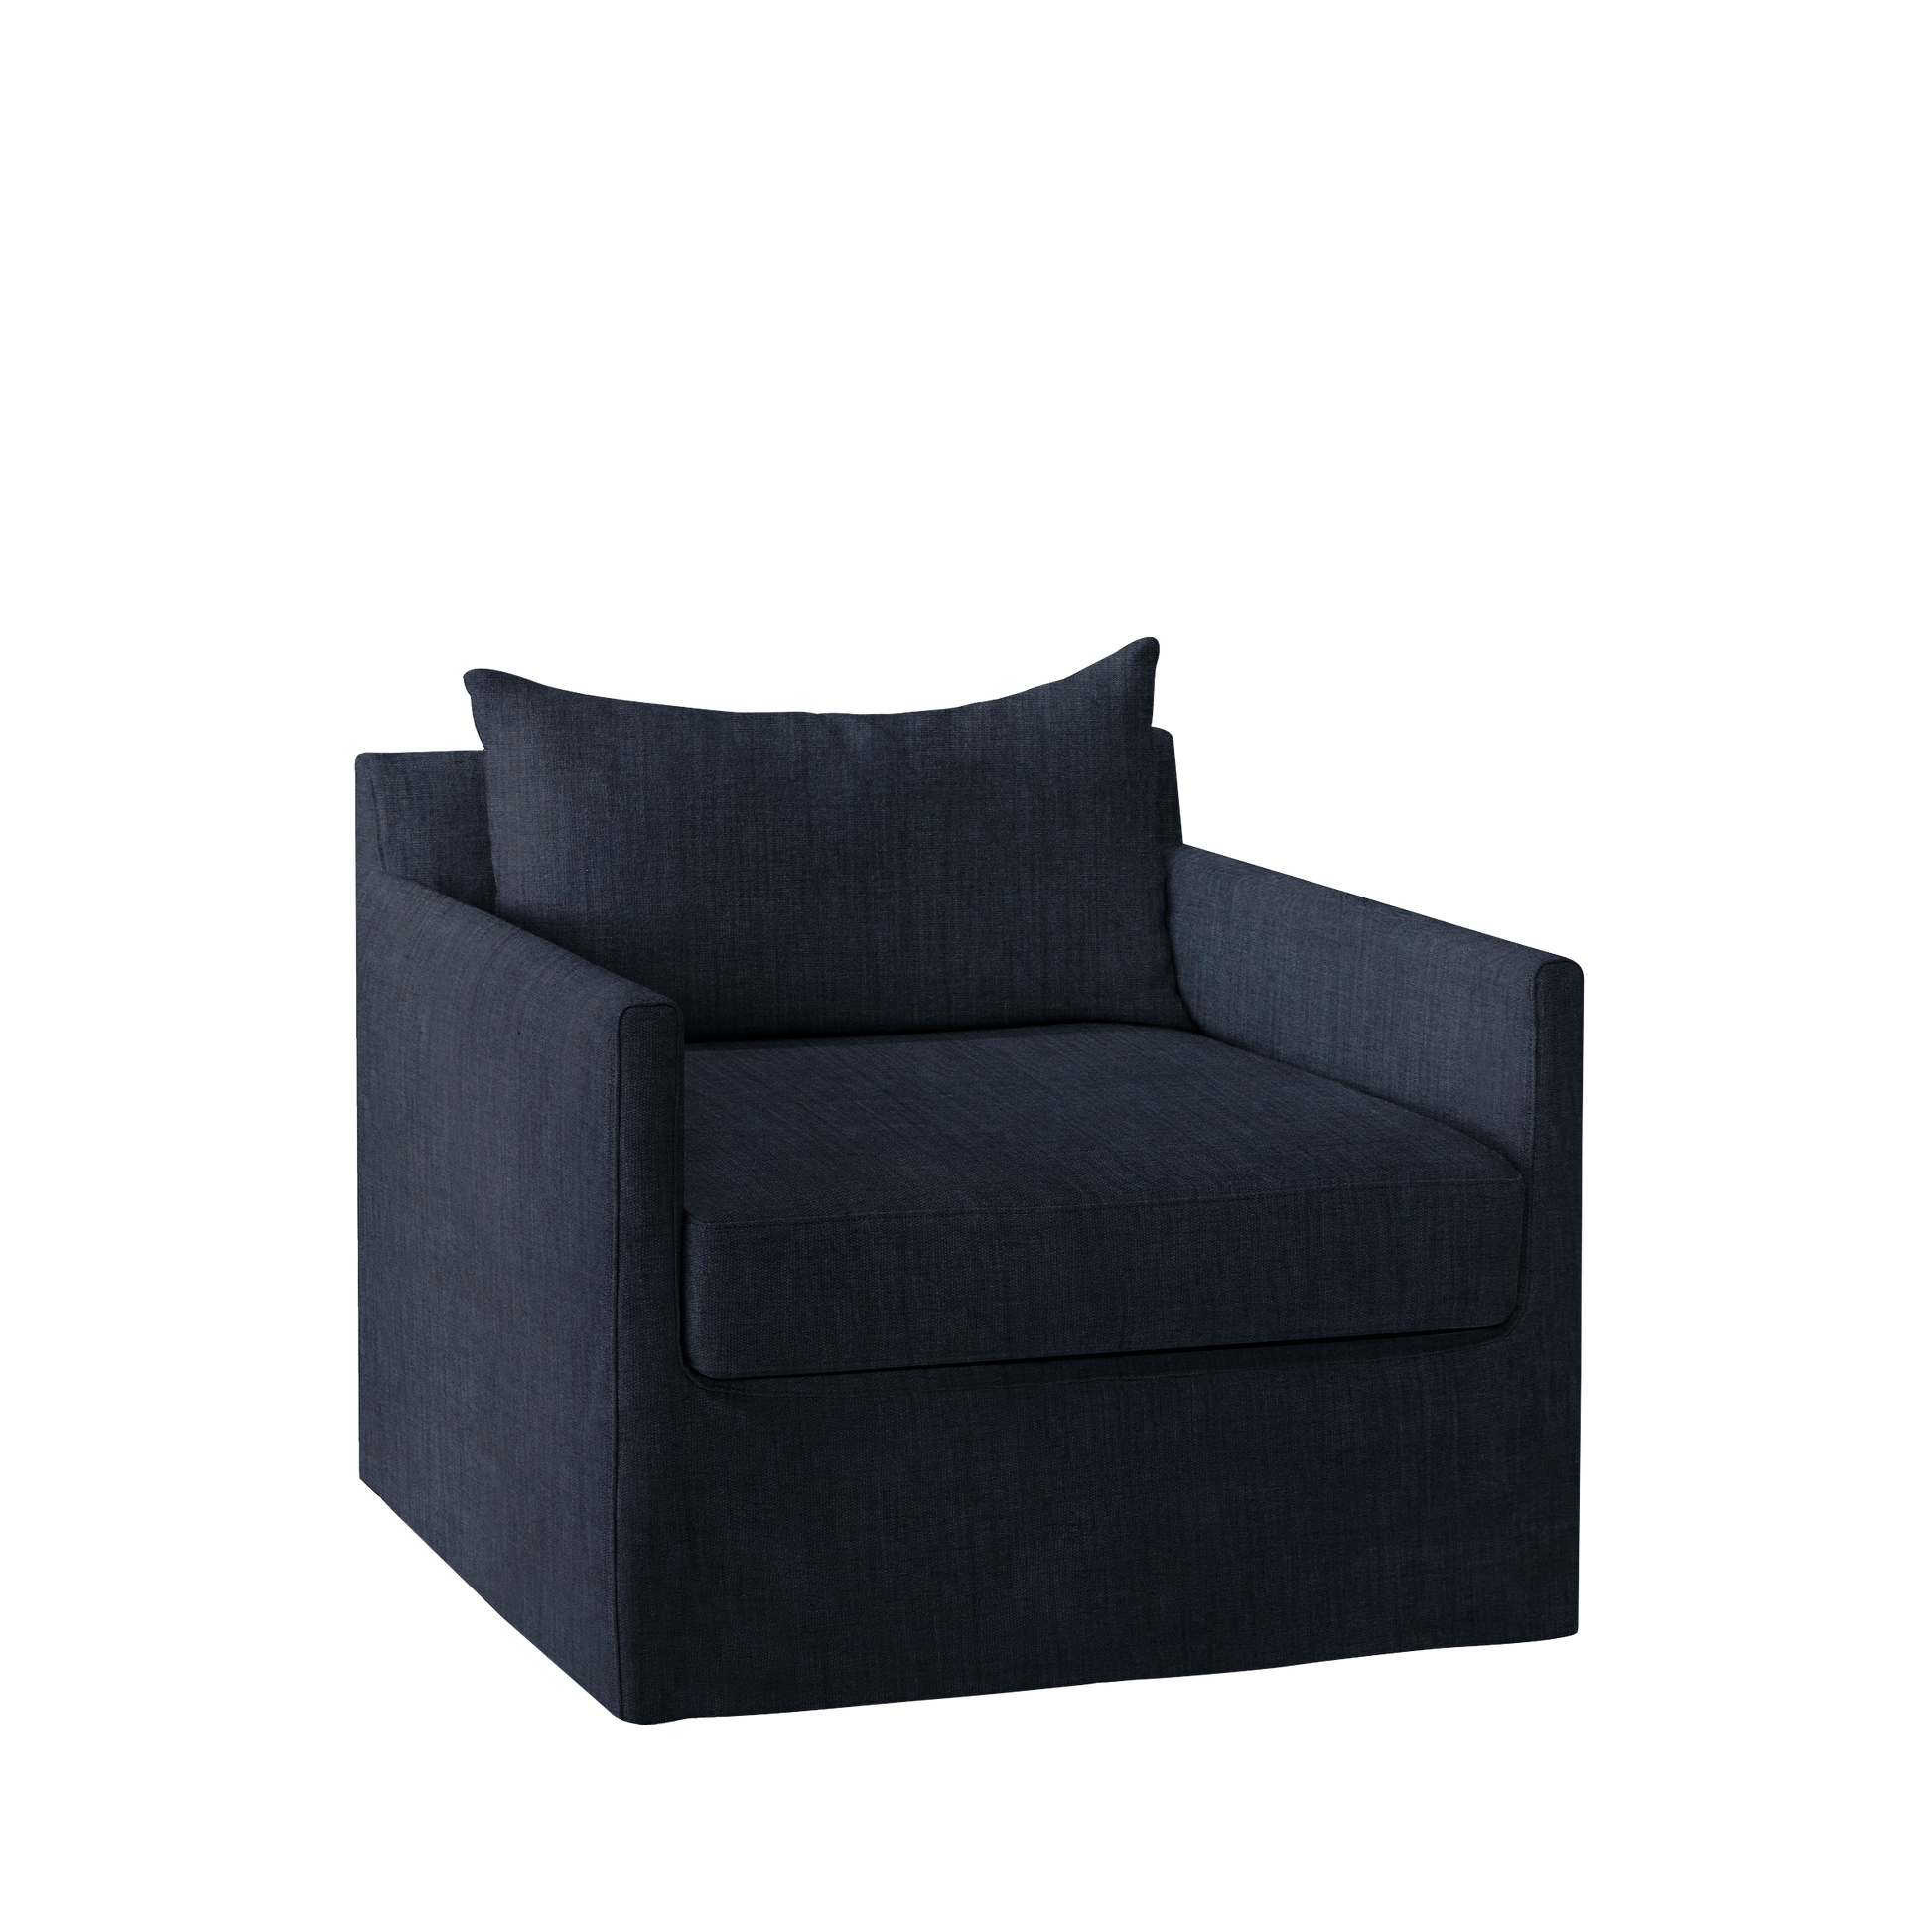 Extra wide Alba lounge chair with dark blue textile